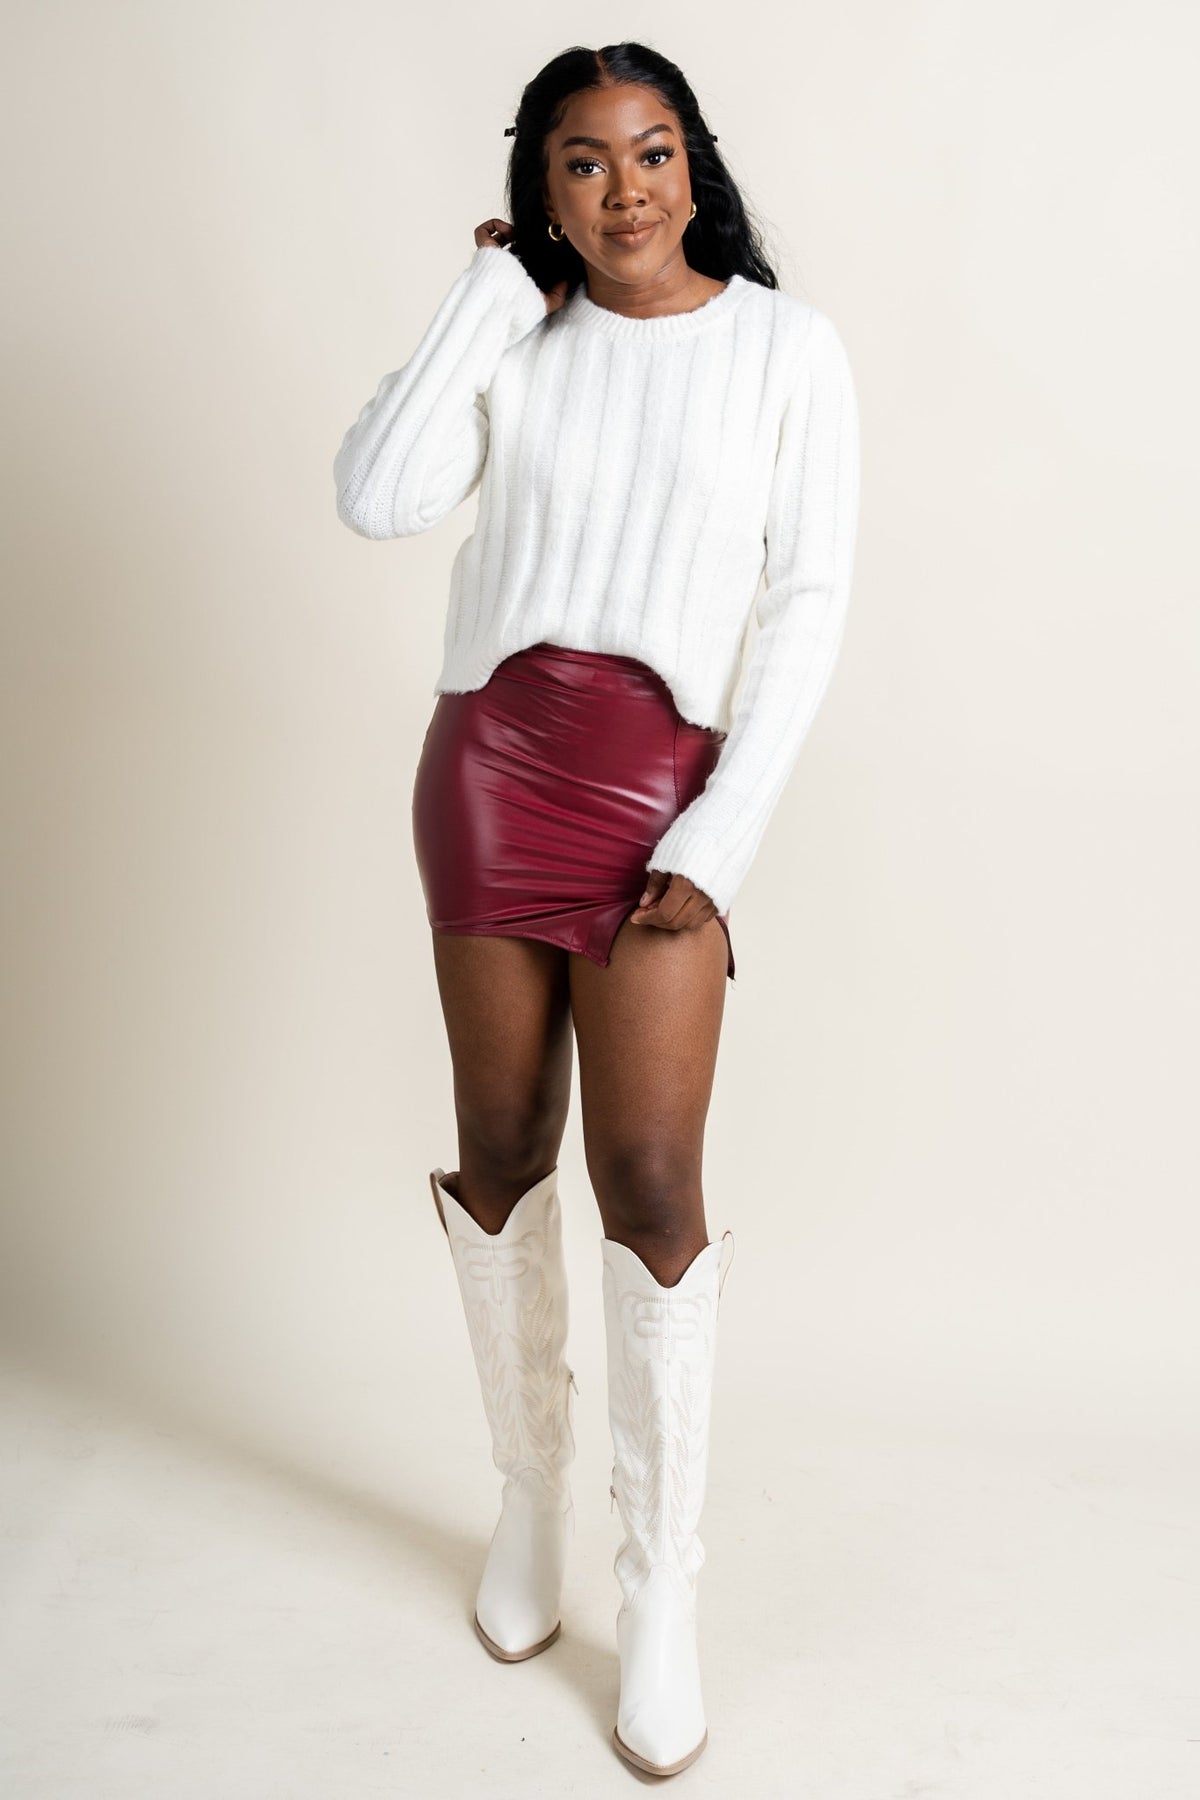 Faux leather skirt burgundy - Trendy Holiday Apparel at Lush Fashion Lounge Boutique in Oklahoma City